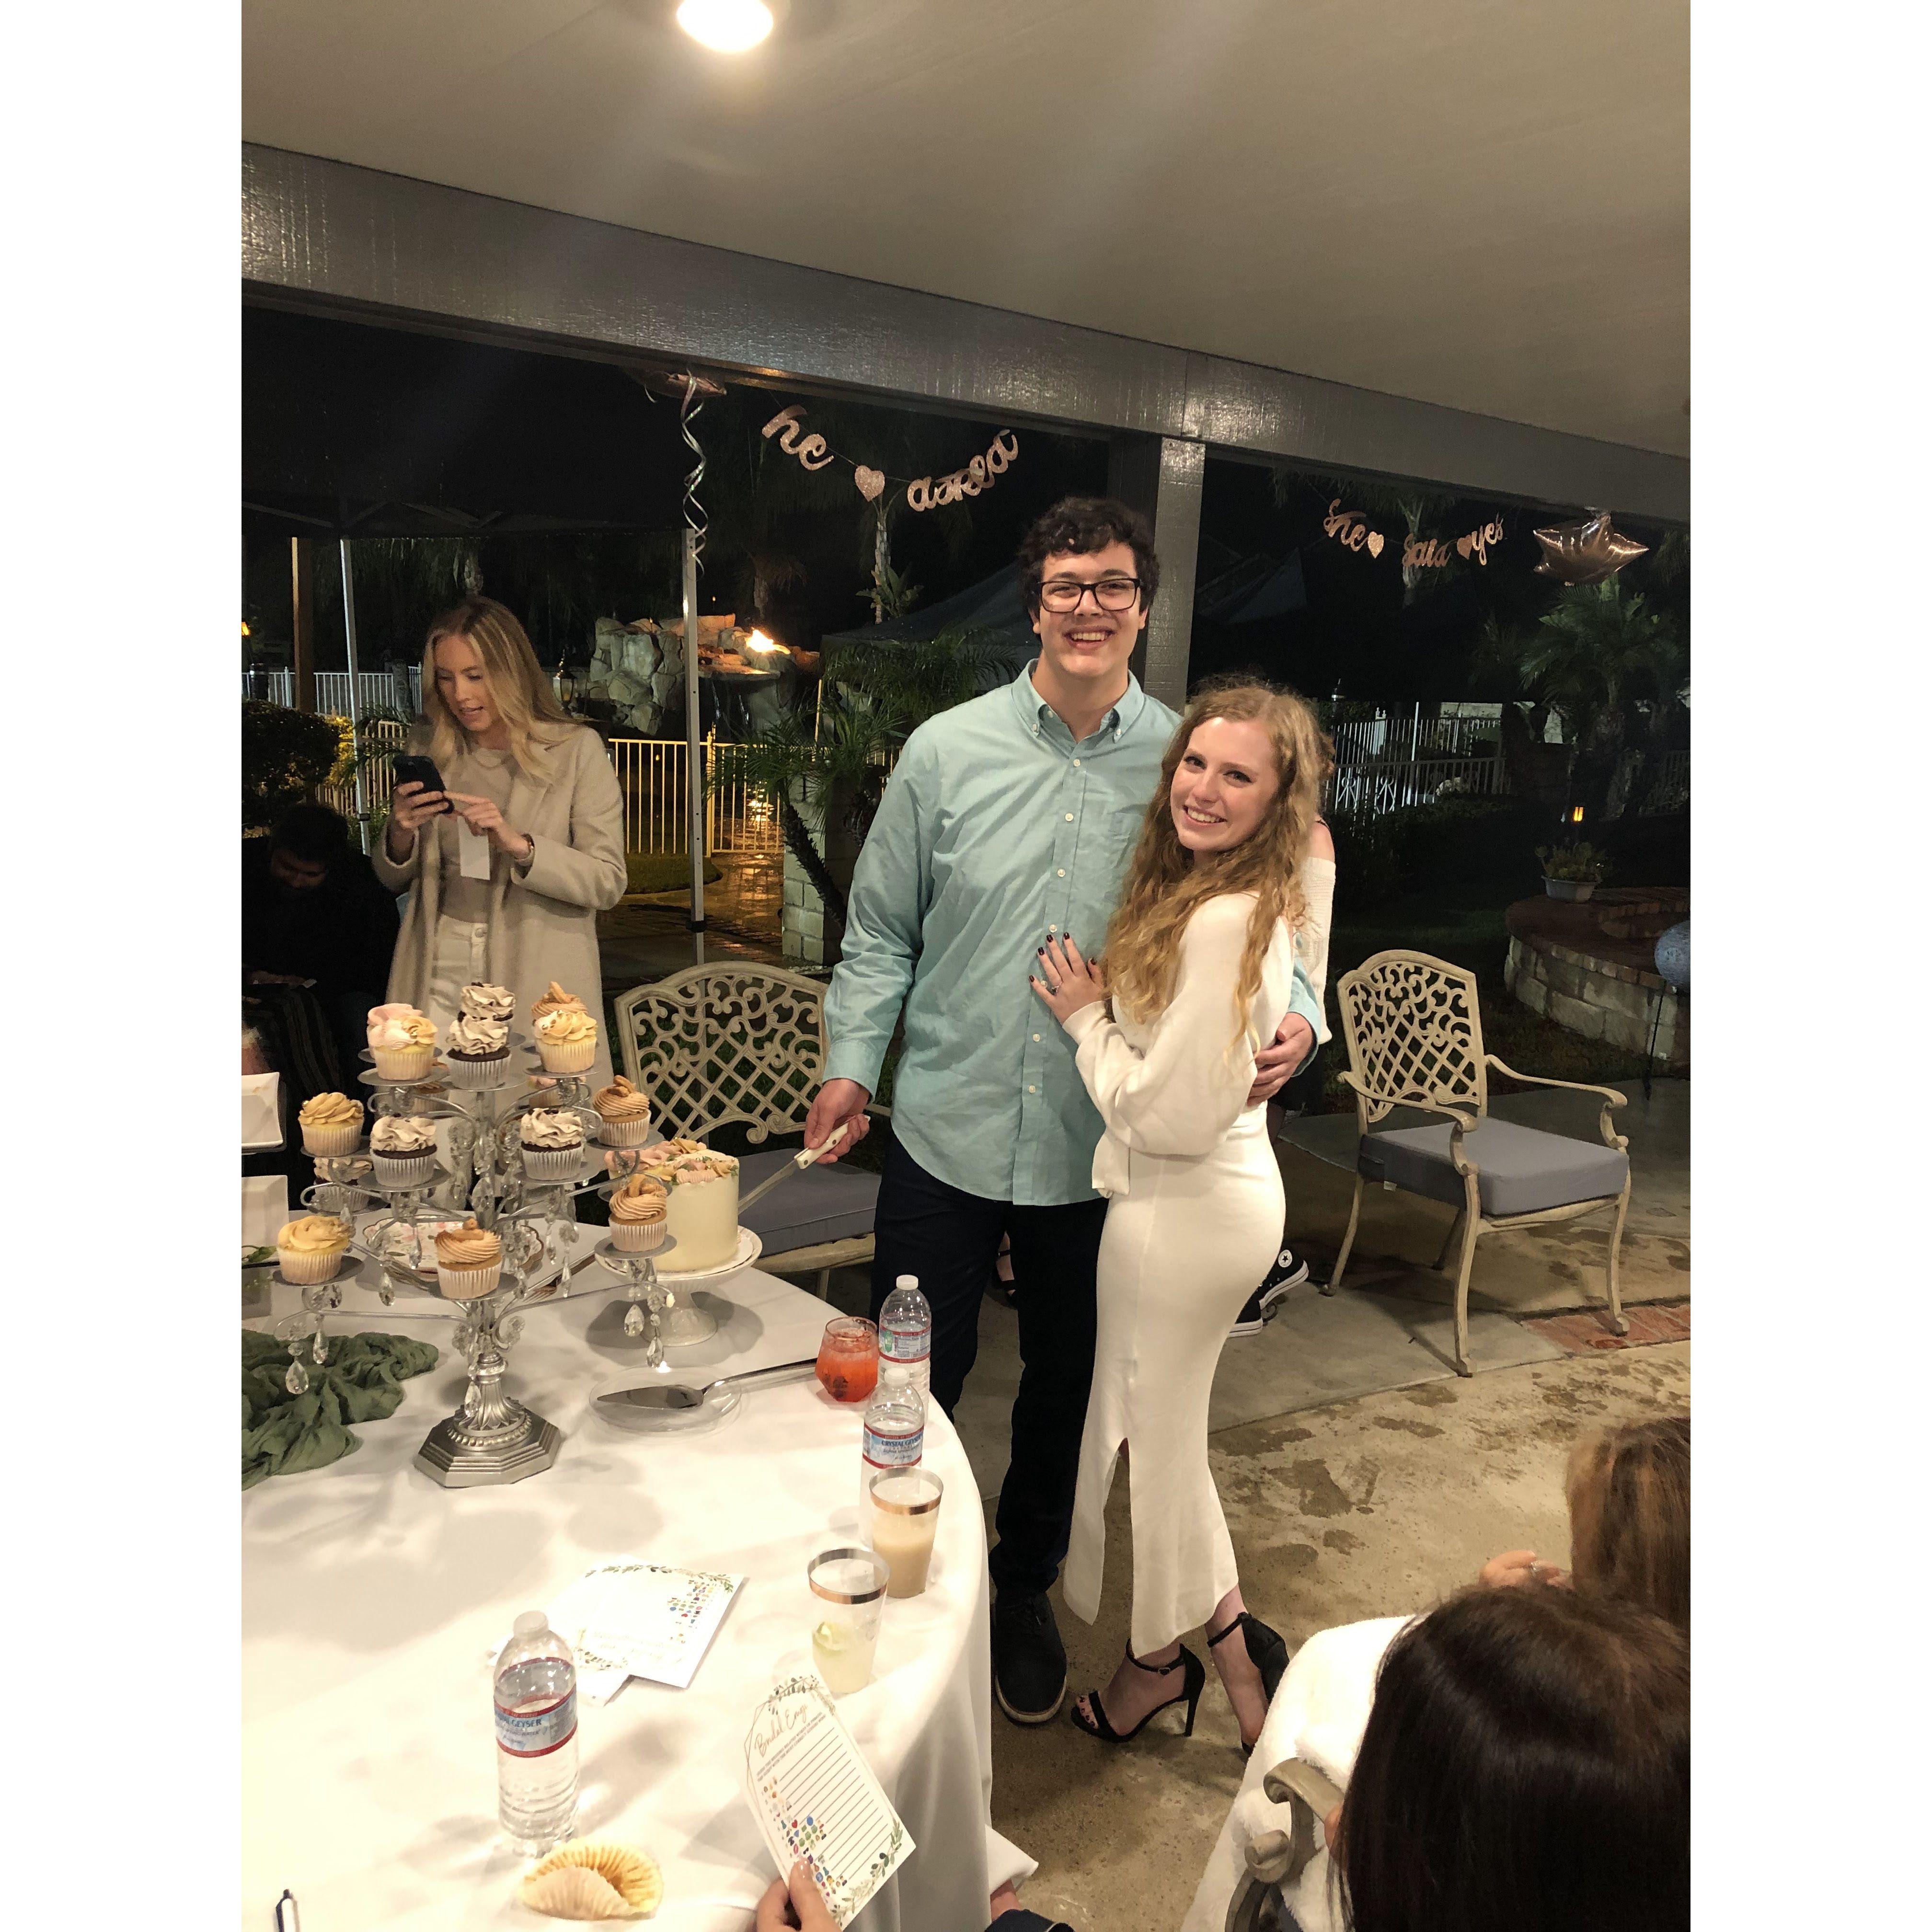 Our Engagement Party!